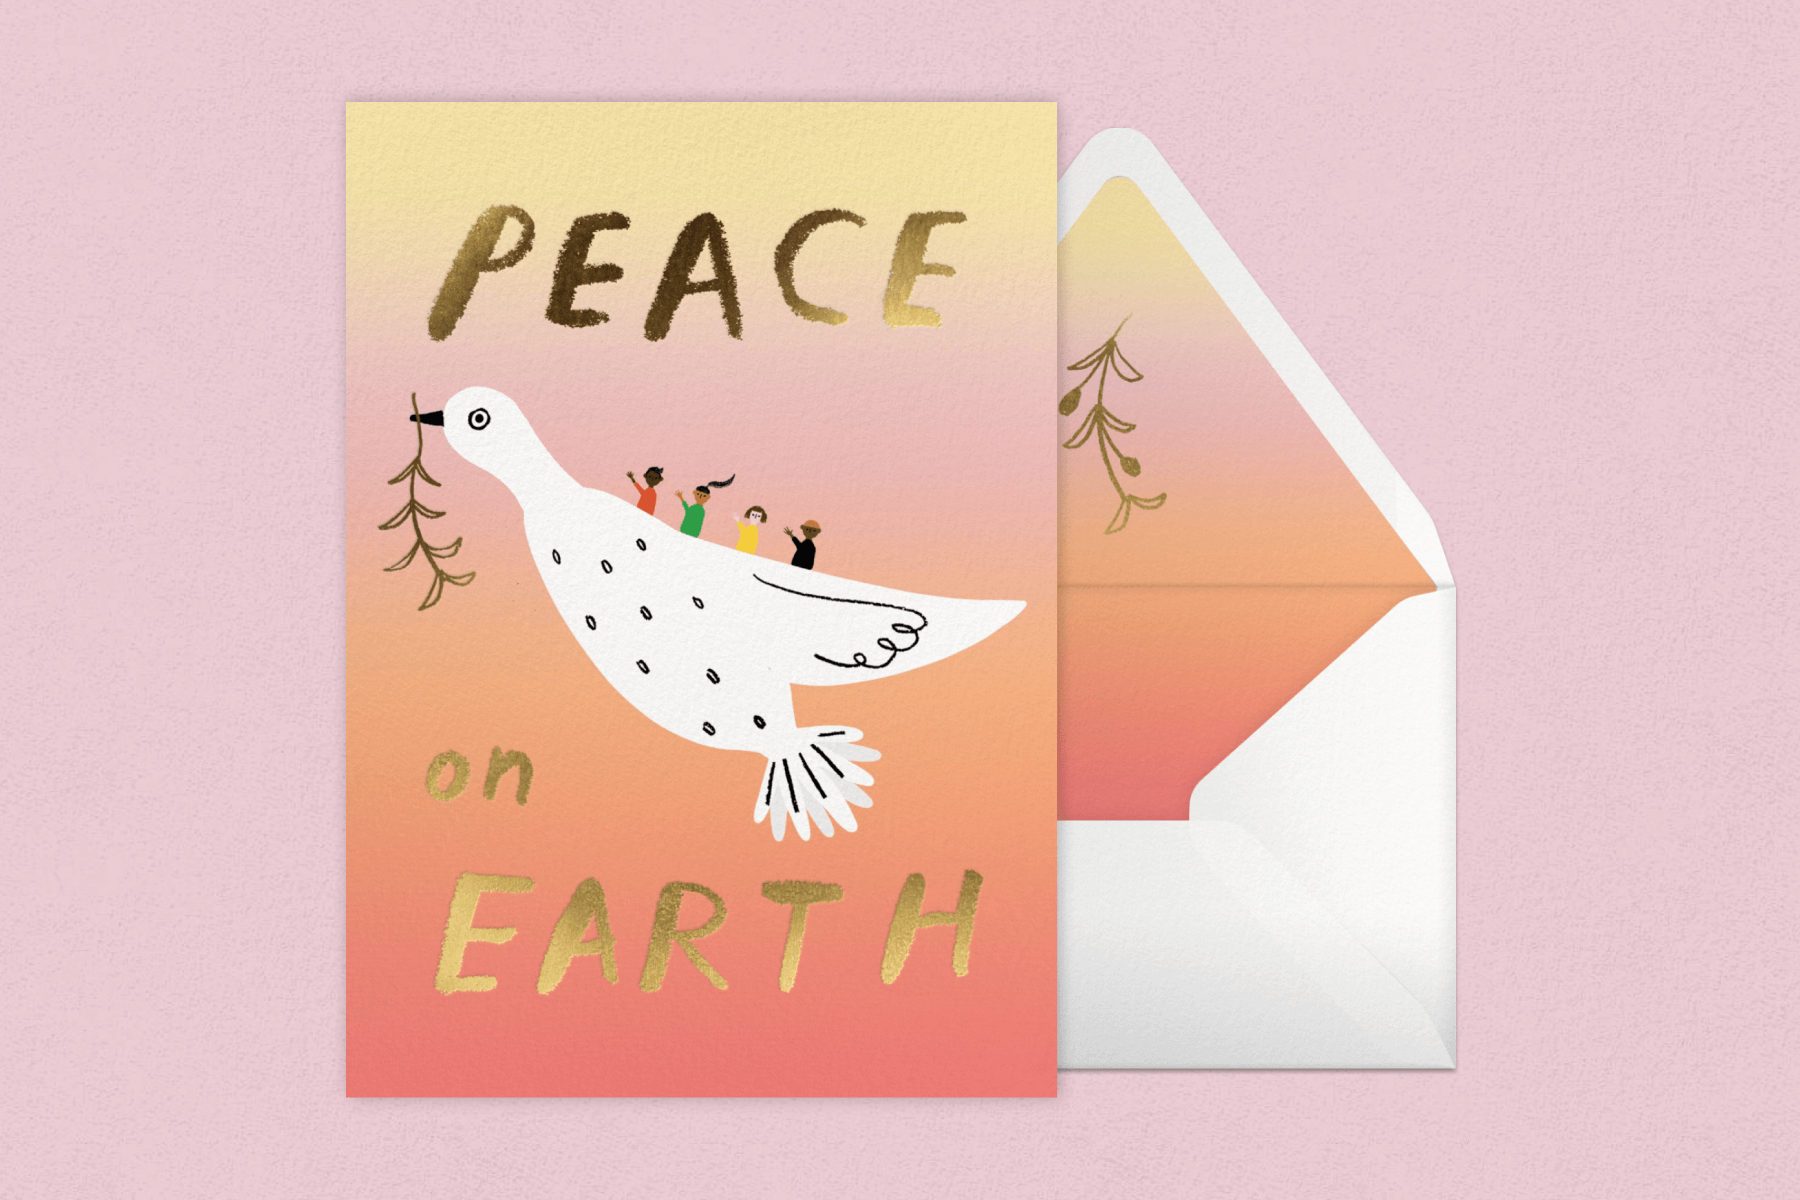 A card featuring an illustration of a dove with passengers and the golden words "Peace on Earth."